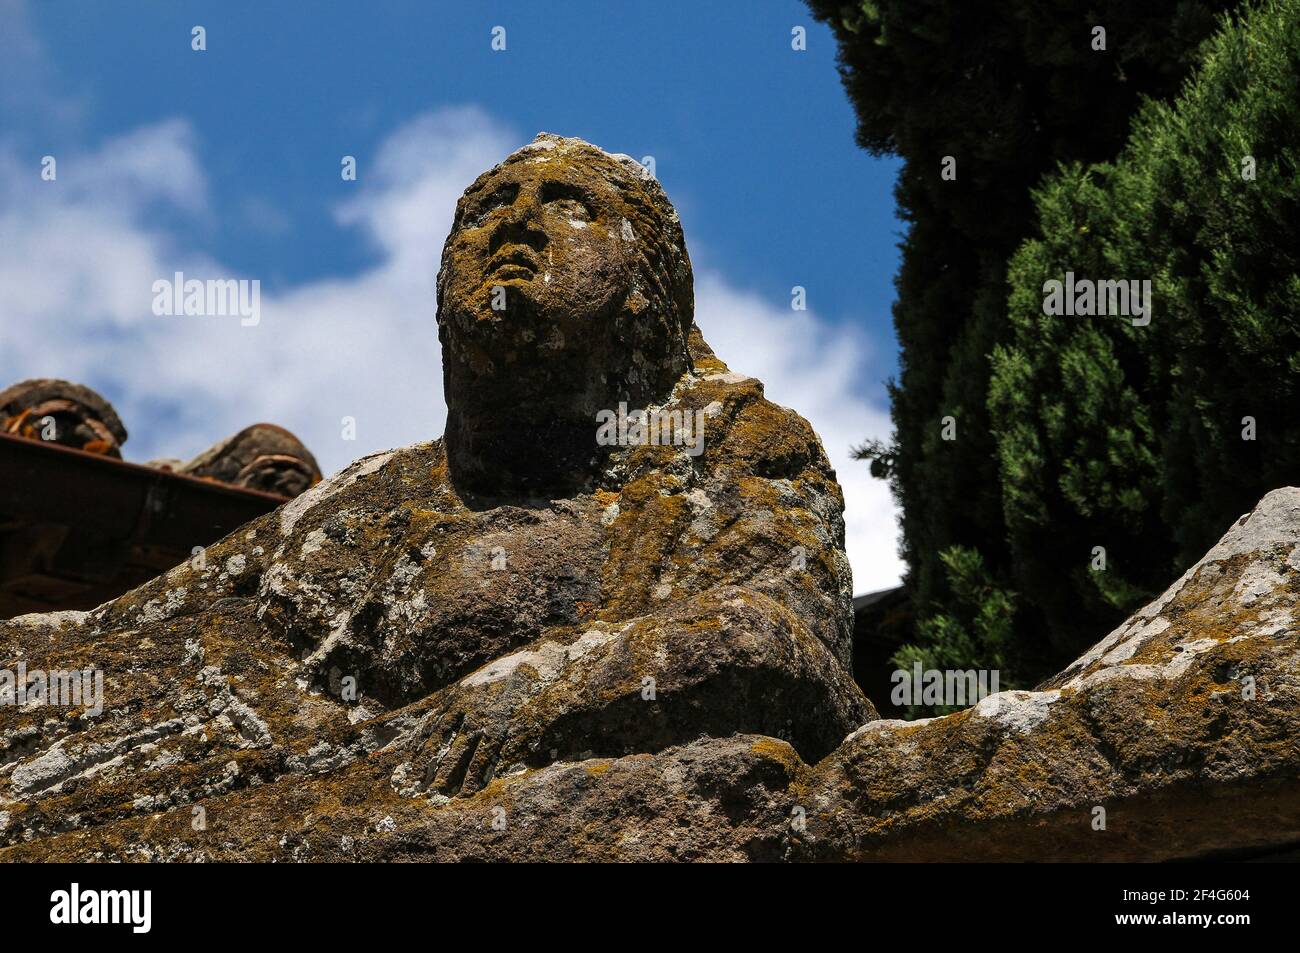 This lichen-encrusted face, staring up to the sky from the Giardini Comunale or public gardens at Tuscania, Lazio, Italy, is among many lifelike portrayals of citizens of ancient Etruscan Tuscana whose remains were interred, in stone sarcophagi, in vast necropoli or cemeteries in and around the settlement.  From the late-1800s, many of these effigies, sculpted on the lids of their tomb chests, were re-used as distinctive urban furniture and public art in the streets of Tuscania. Stock Photo